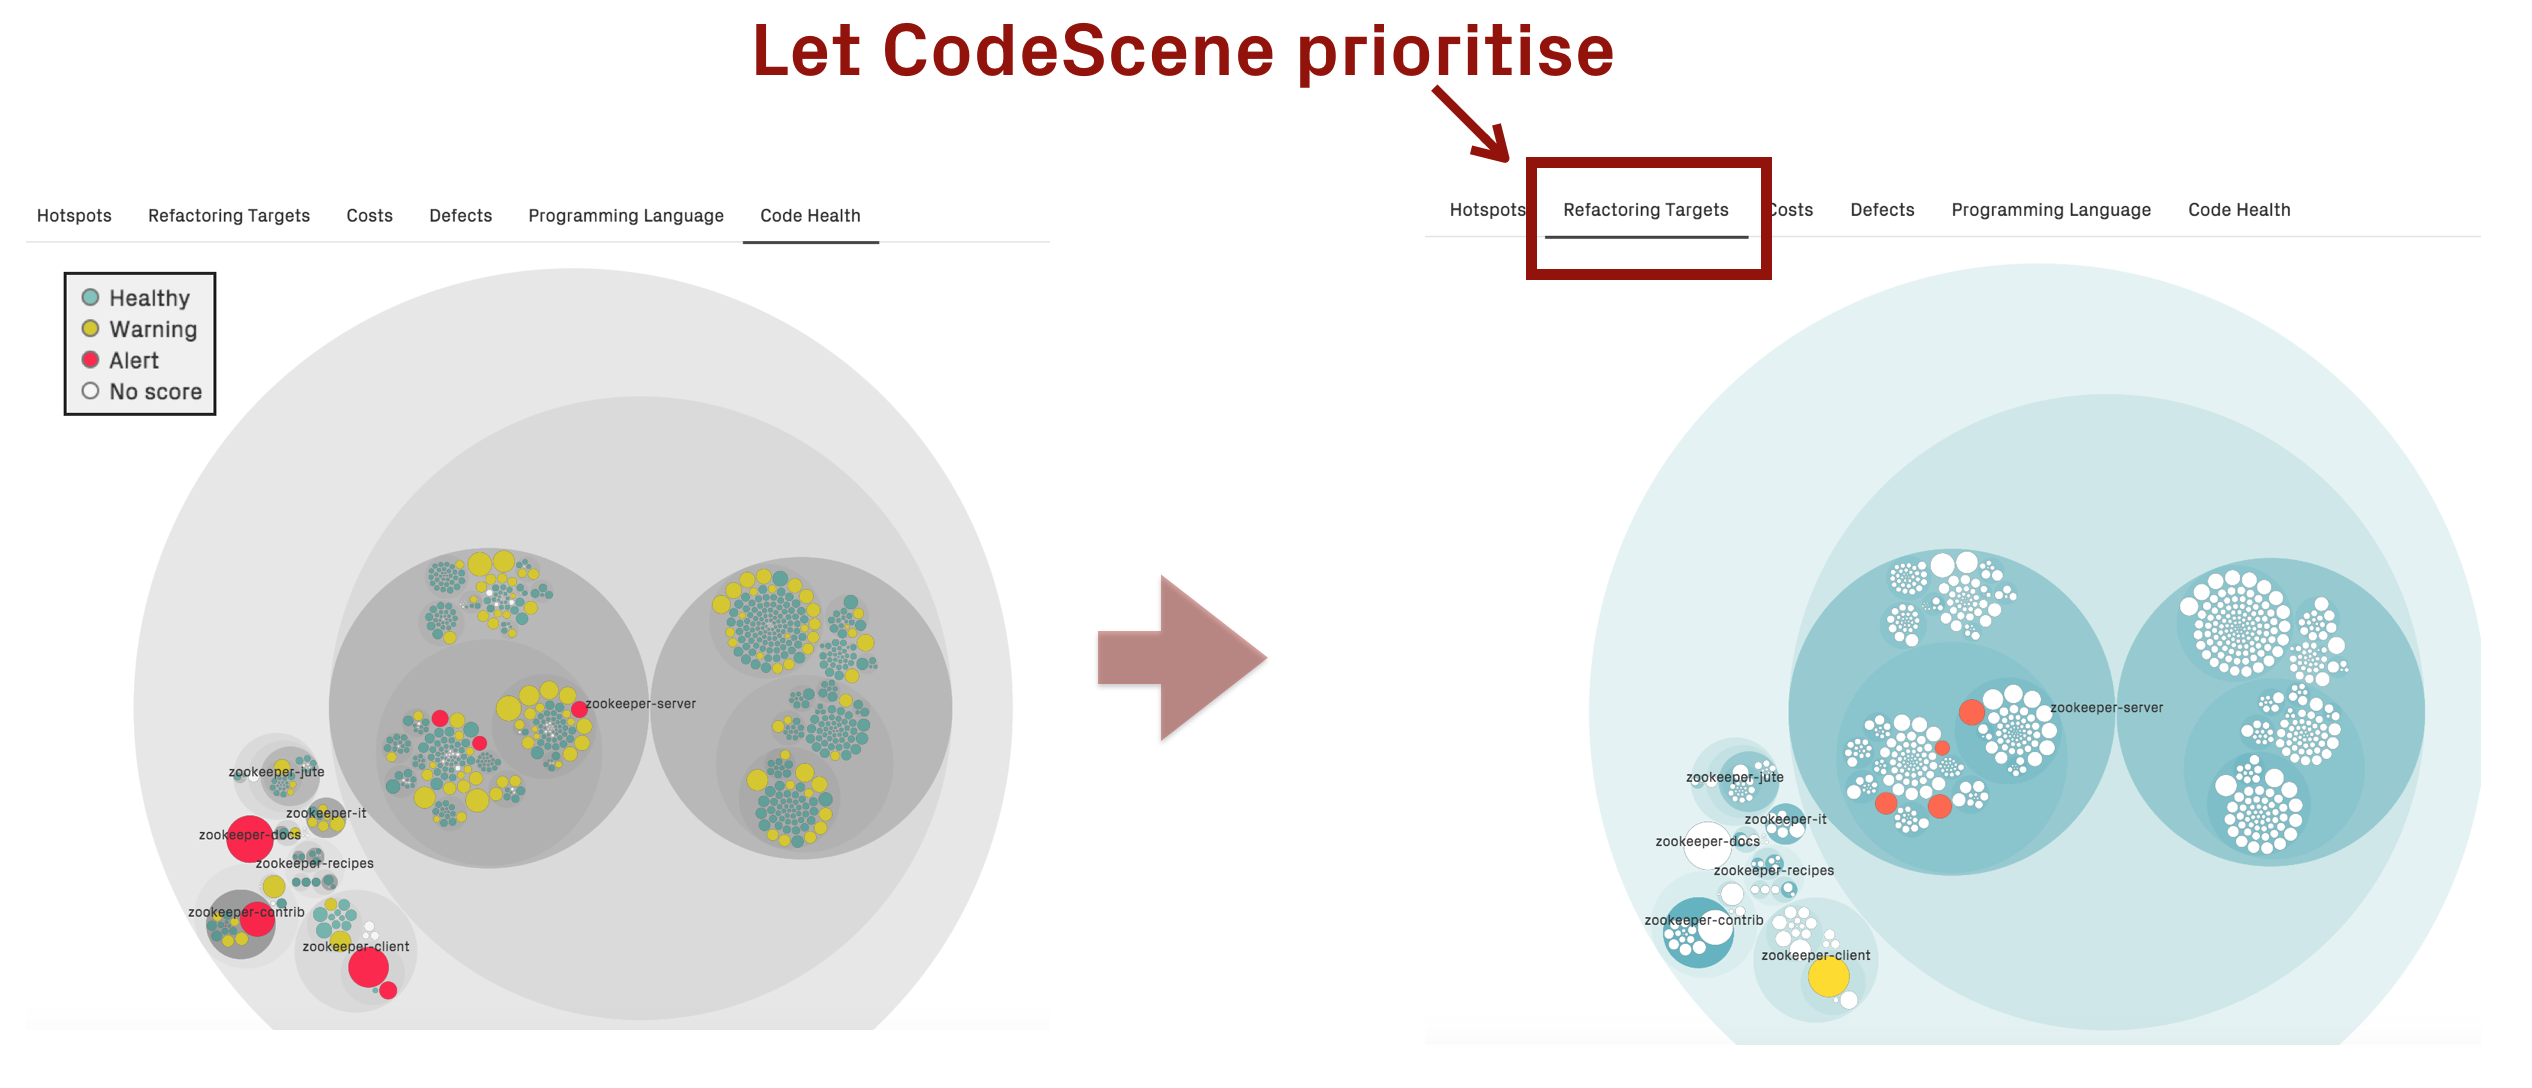 CodeScene priorities the most relevant hotspots automatically.